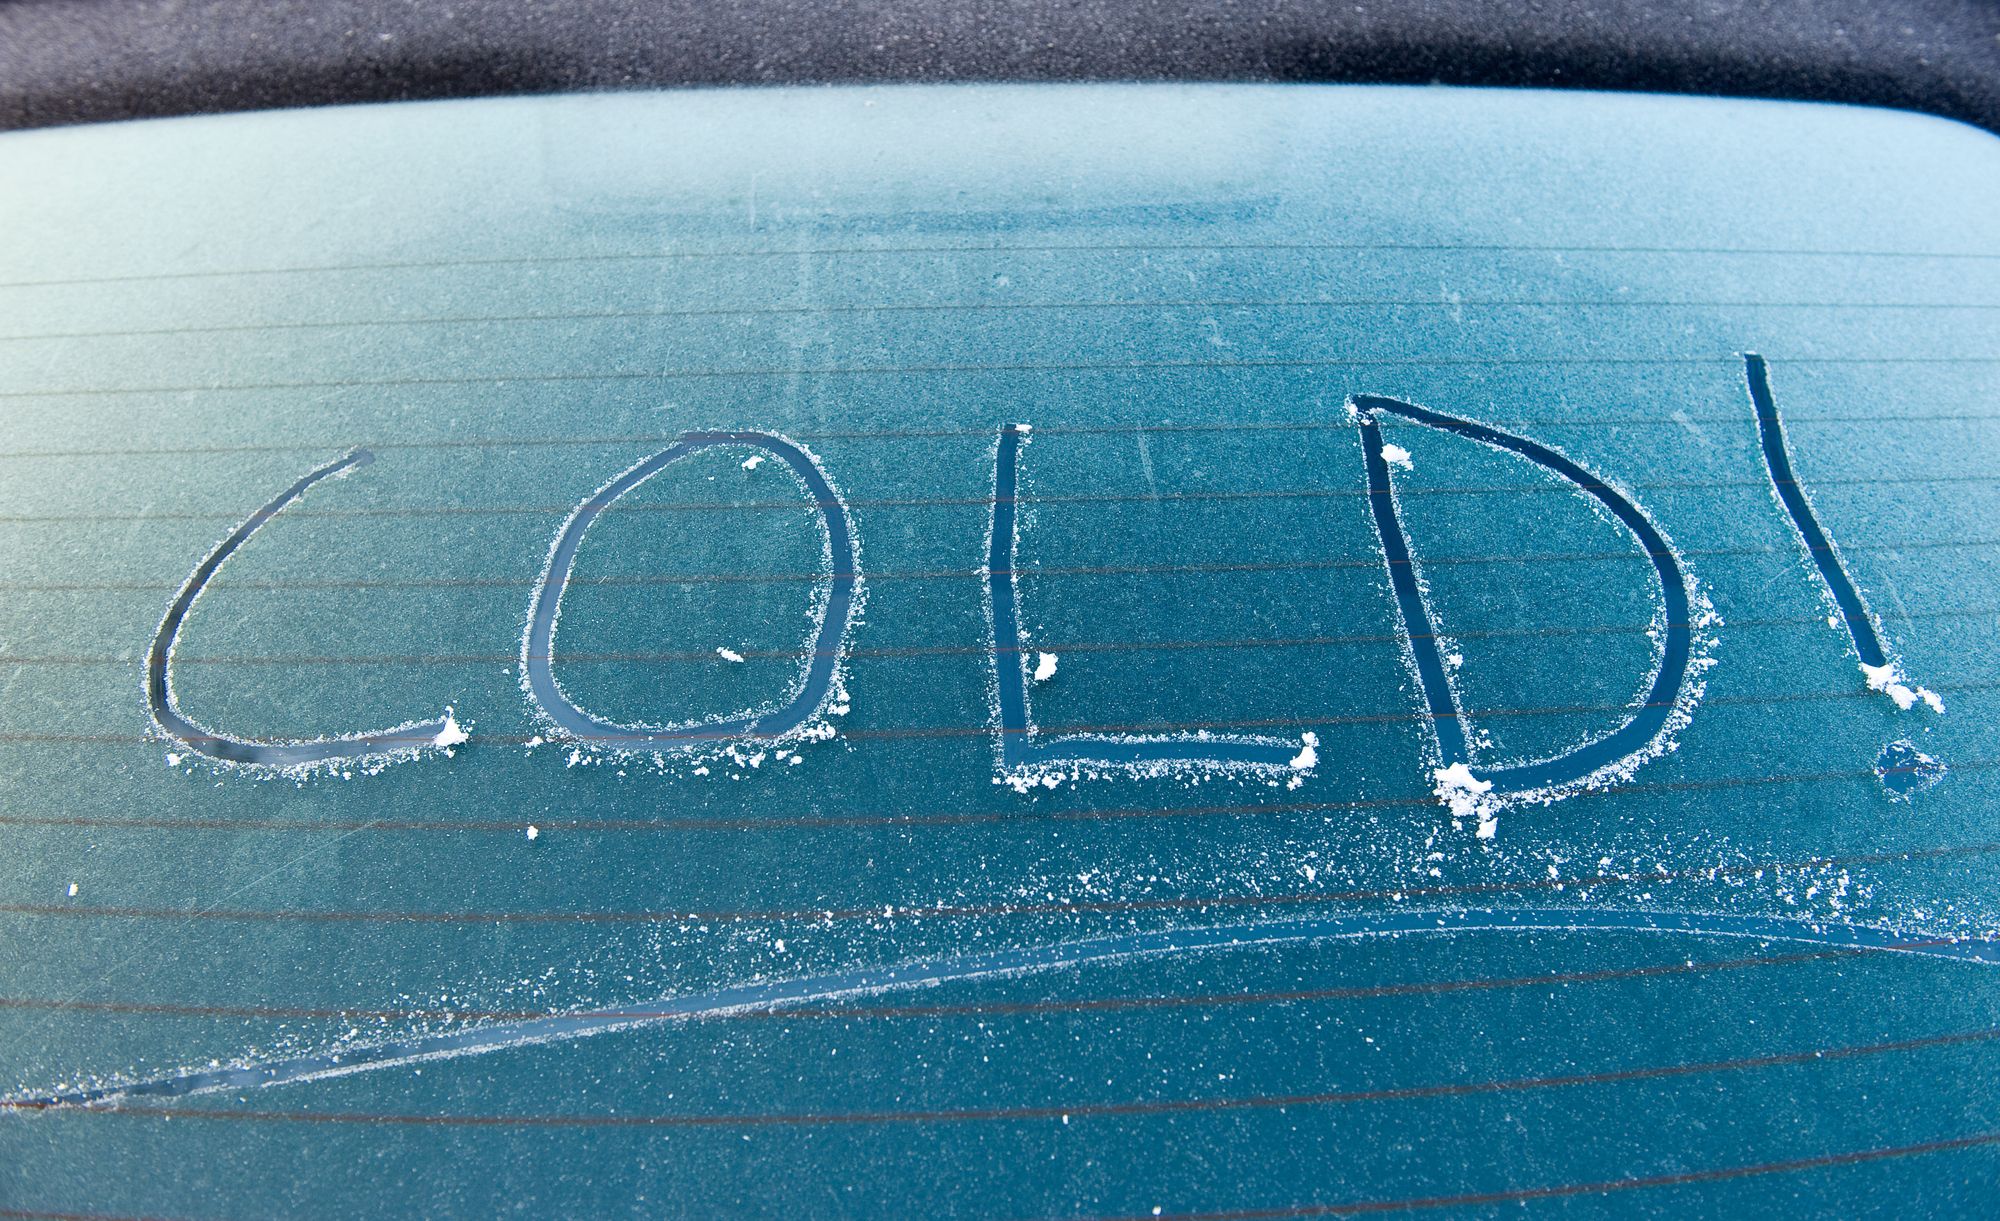 Driving In Cold Weather: What To Watch For